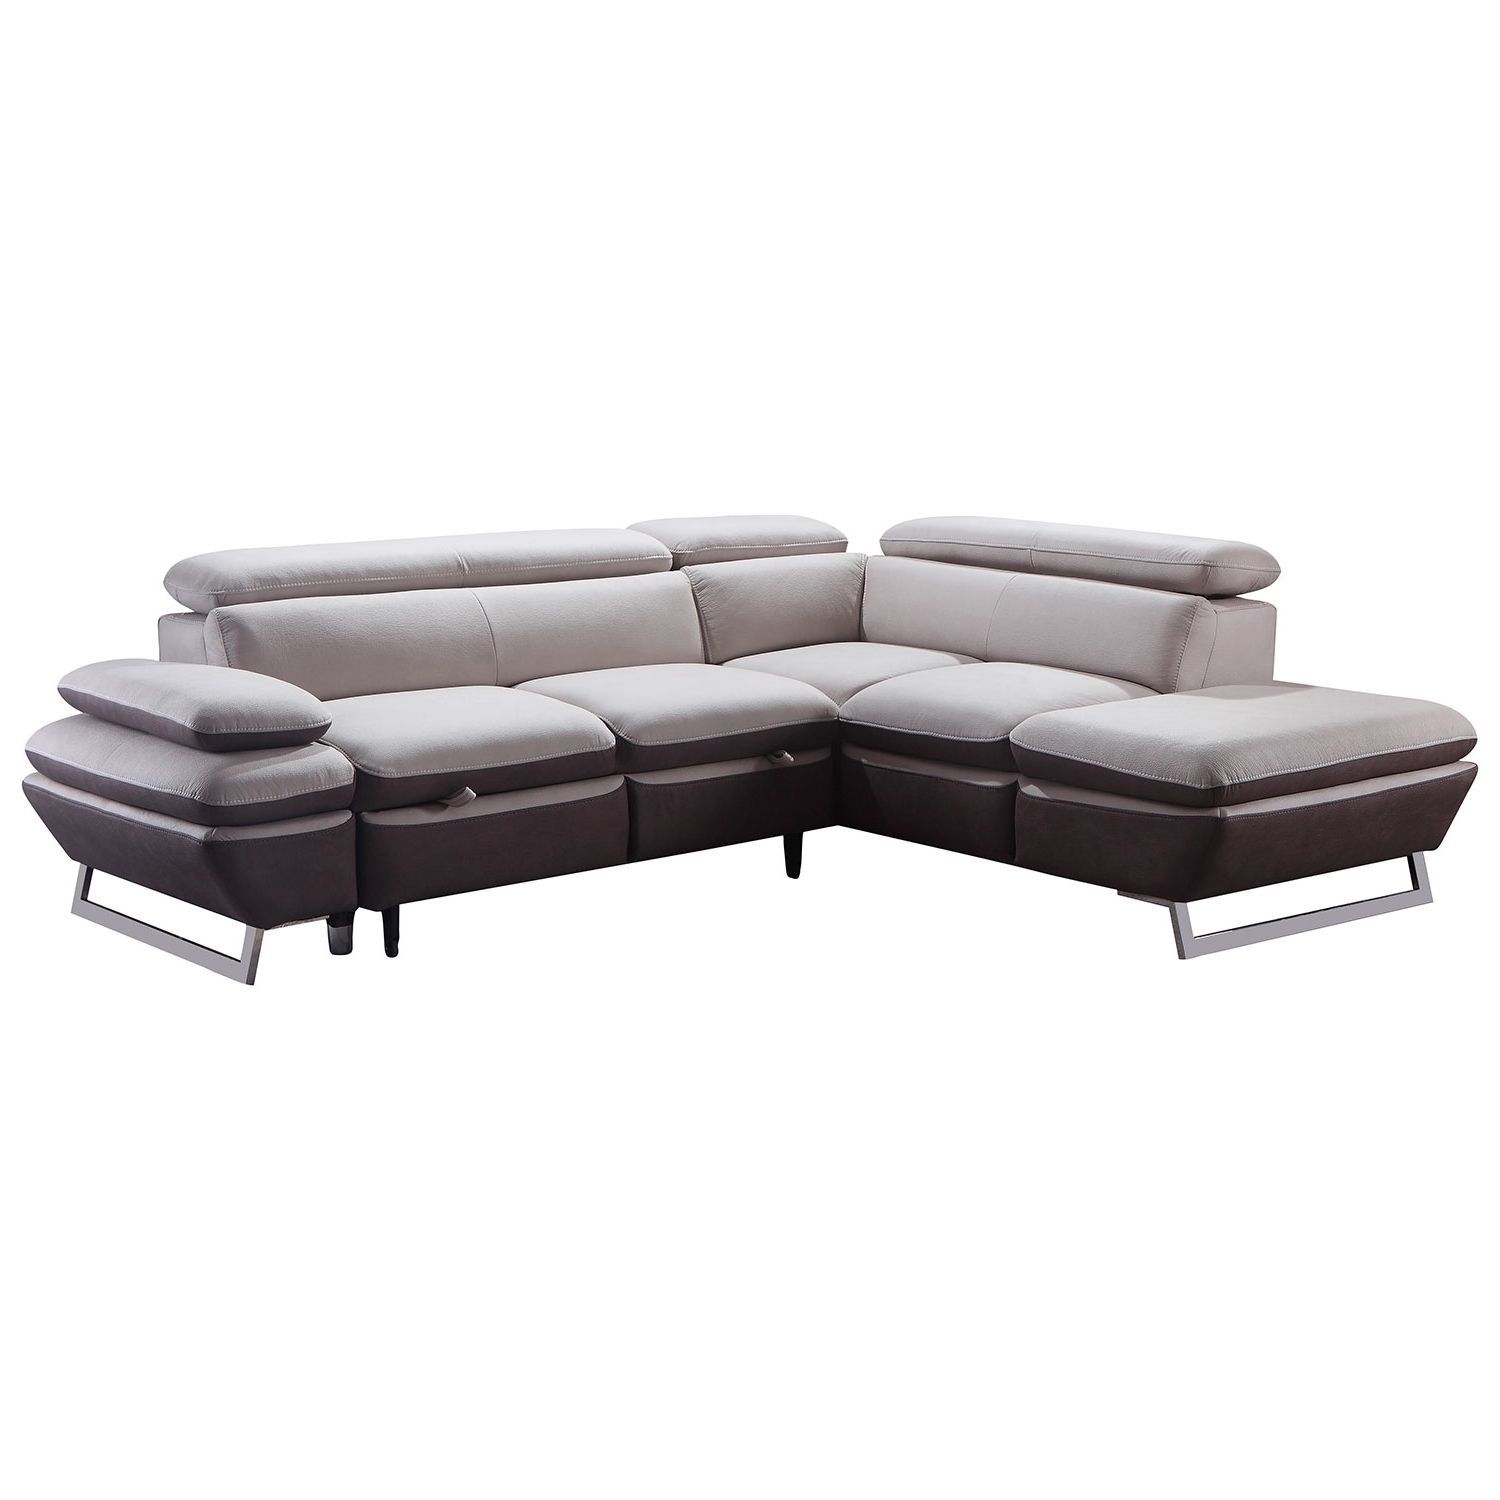 Newfoundland Sectional Sofas With Regard To 2018 Nina Contemporary 2 Piece Nappa Sectional Sofa With Right Facing (View 12 of 20)